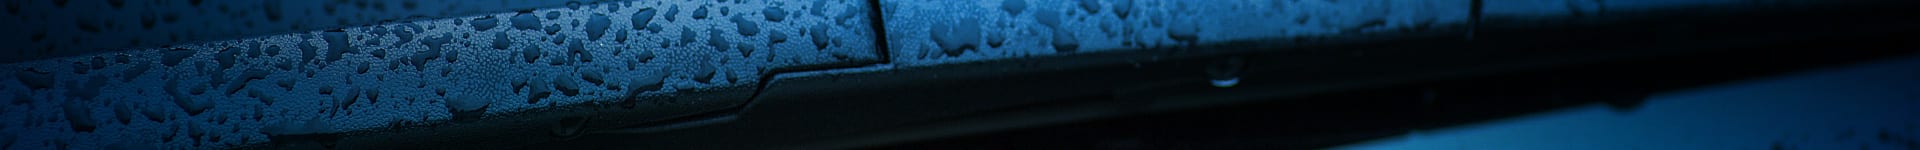 If you get Rain-X® Original Glass Treatment on your paint, will it ruin the paint?